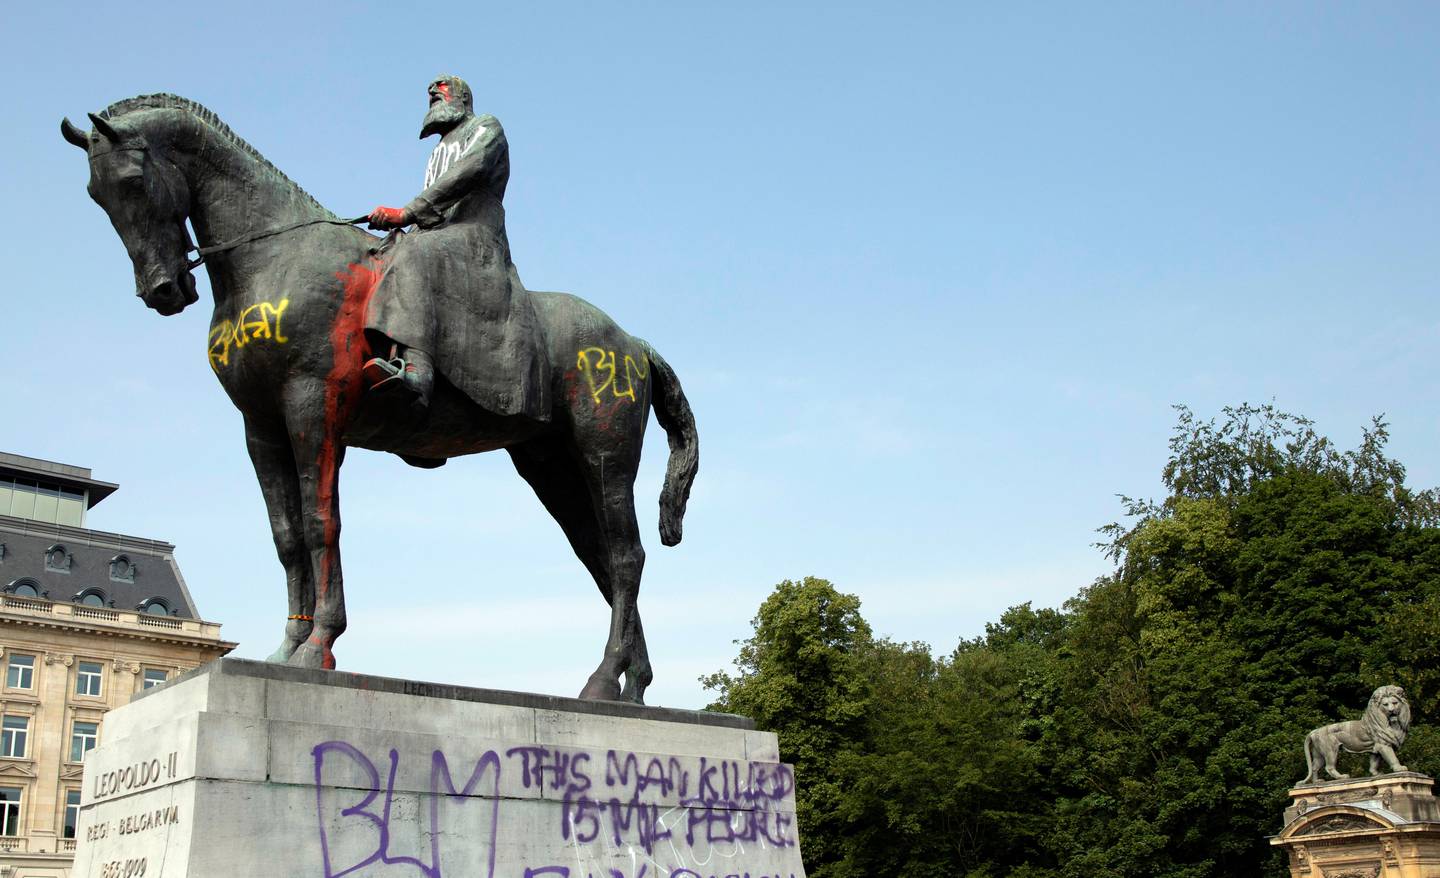 FILE - In this Wednesday, June 10, 2020 file photo, a statue of Belgium's King Leopold II is smeared with red paint and graffiti in Brussels. With the protests sweeping the world in the wake of the killing of George Floyd in Minneapolis, King Leopold II is now increasingly seen as a stain on the nation. (AP Photo/Virginia Mayo, File)